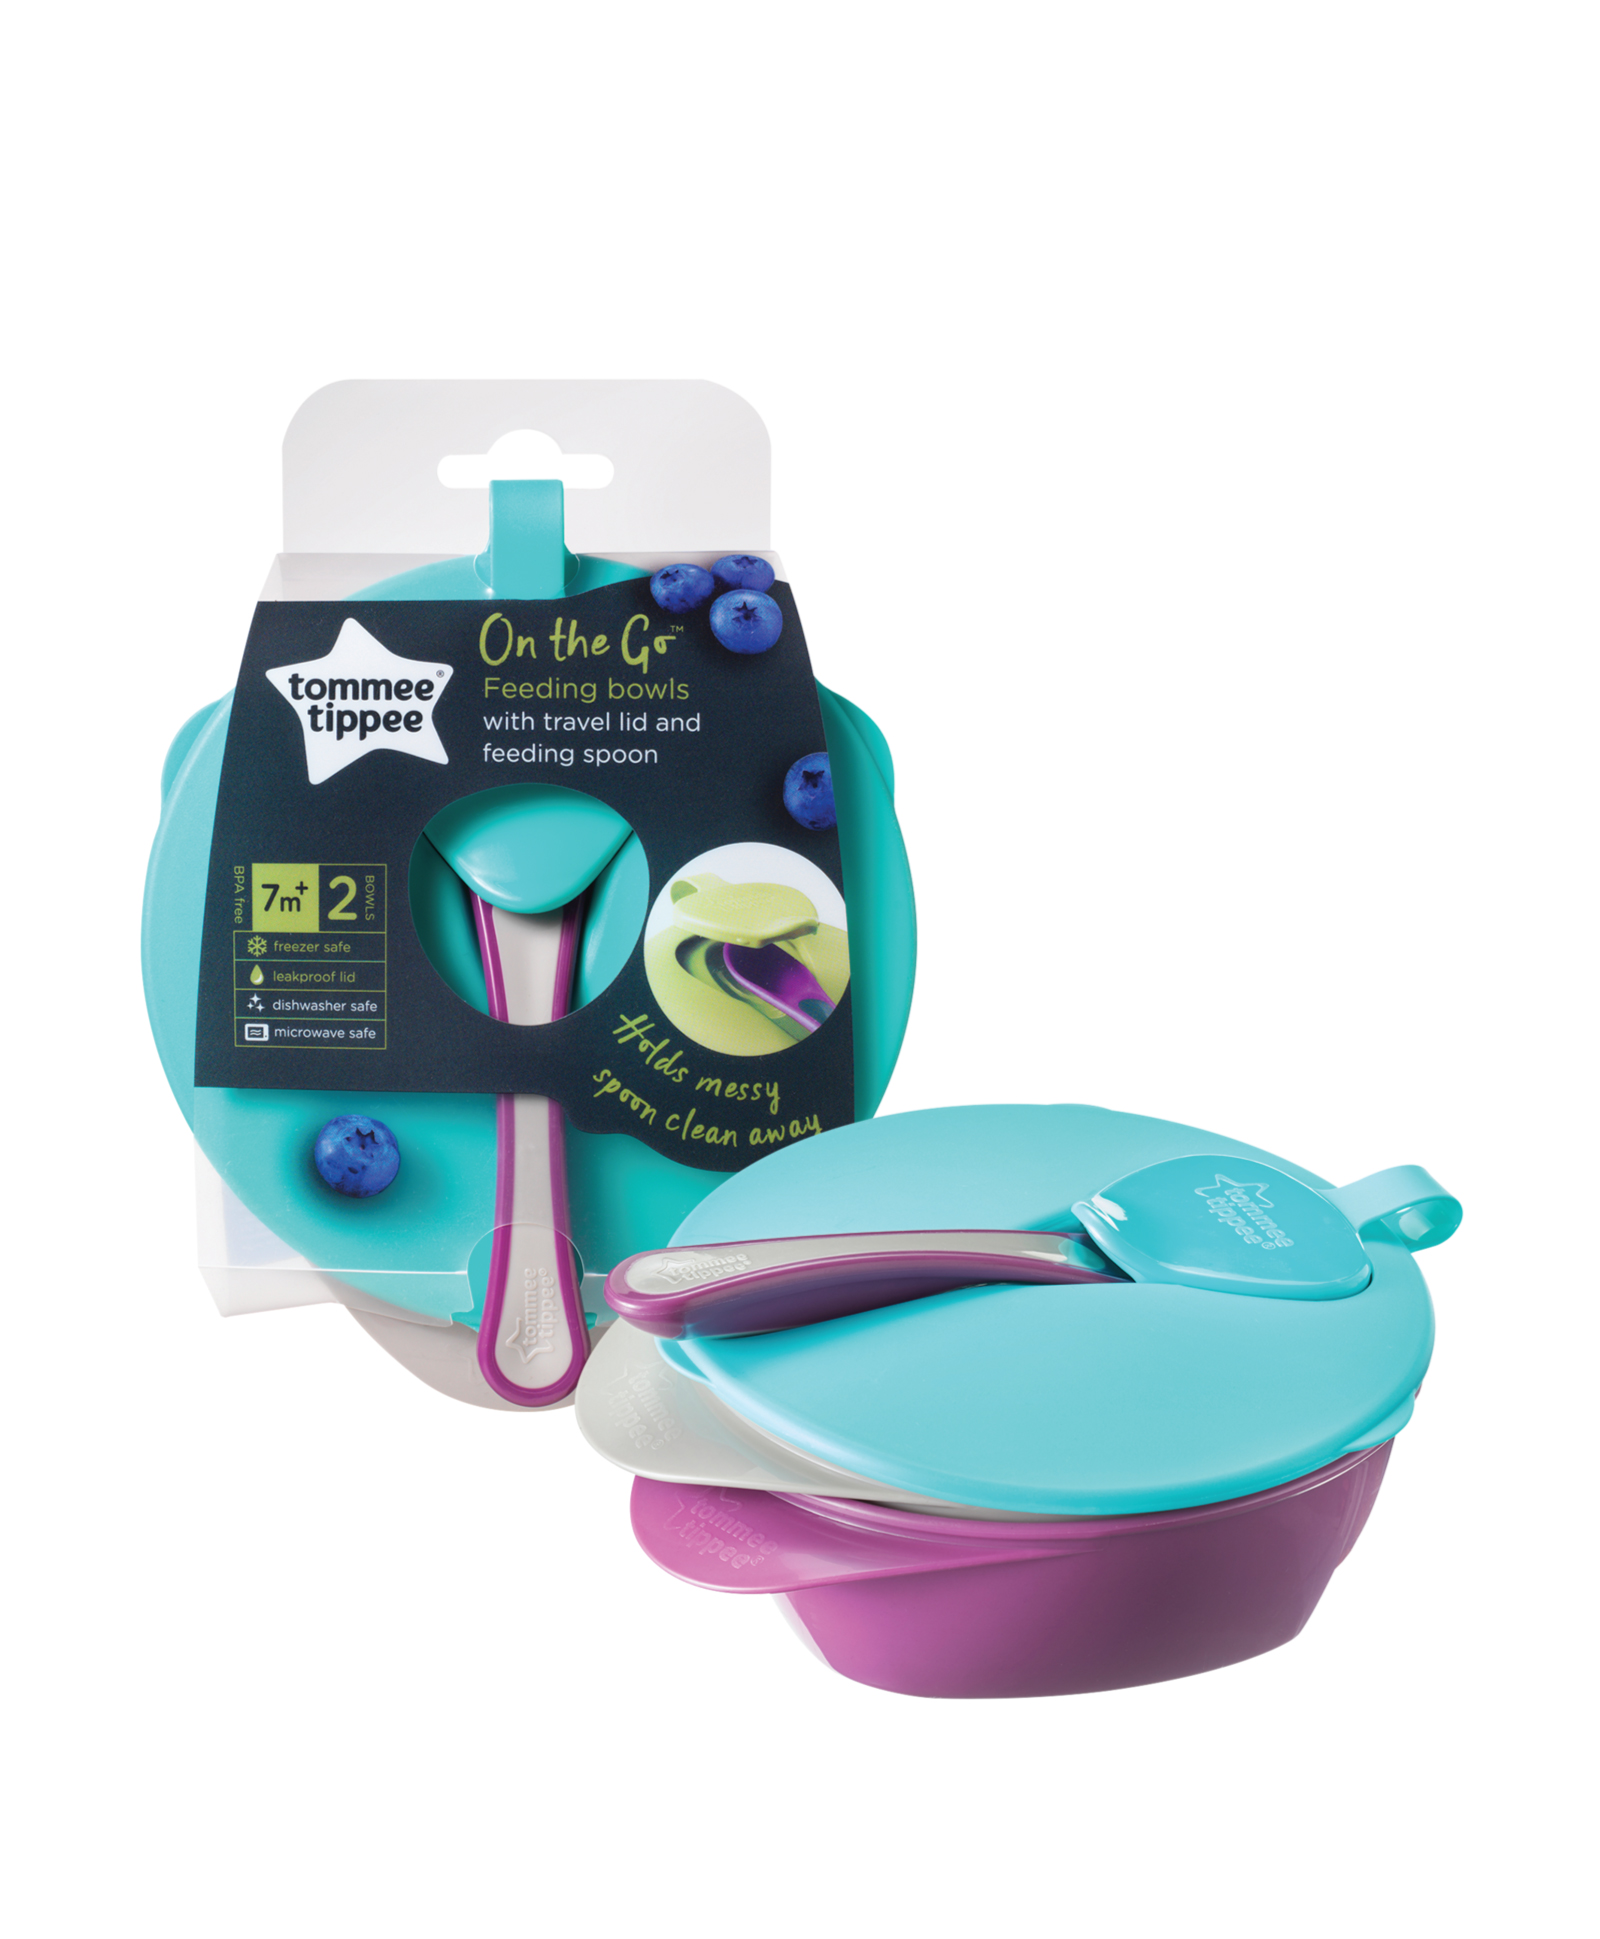 Tommee Tippee On The Go Feeding Bowl x 2, Lid and Spoon- Blue